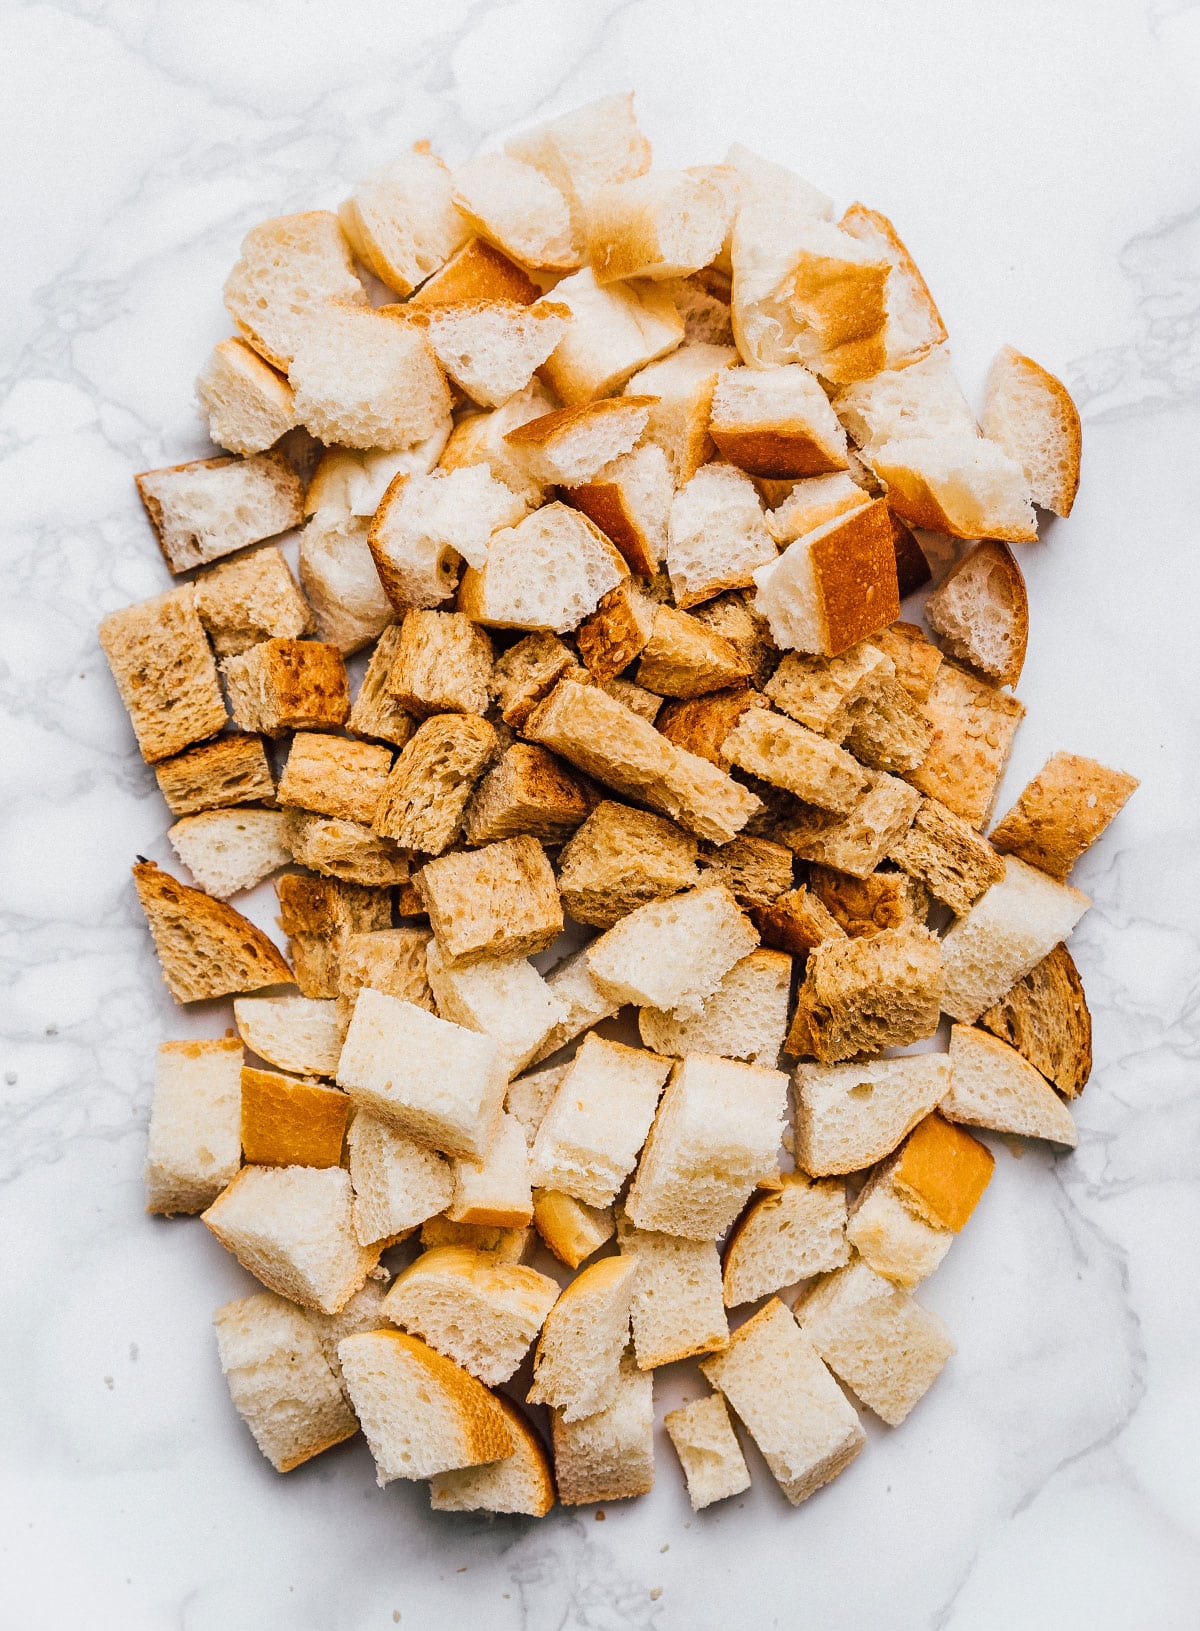 Cut up bread on a marble table for croutons.